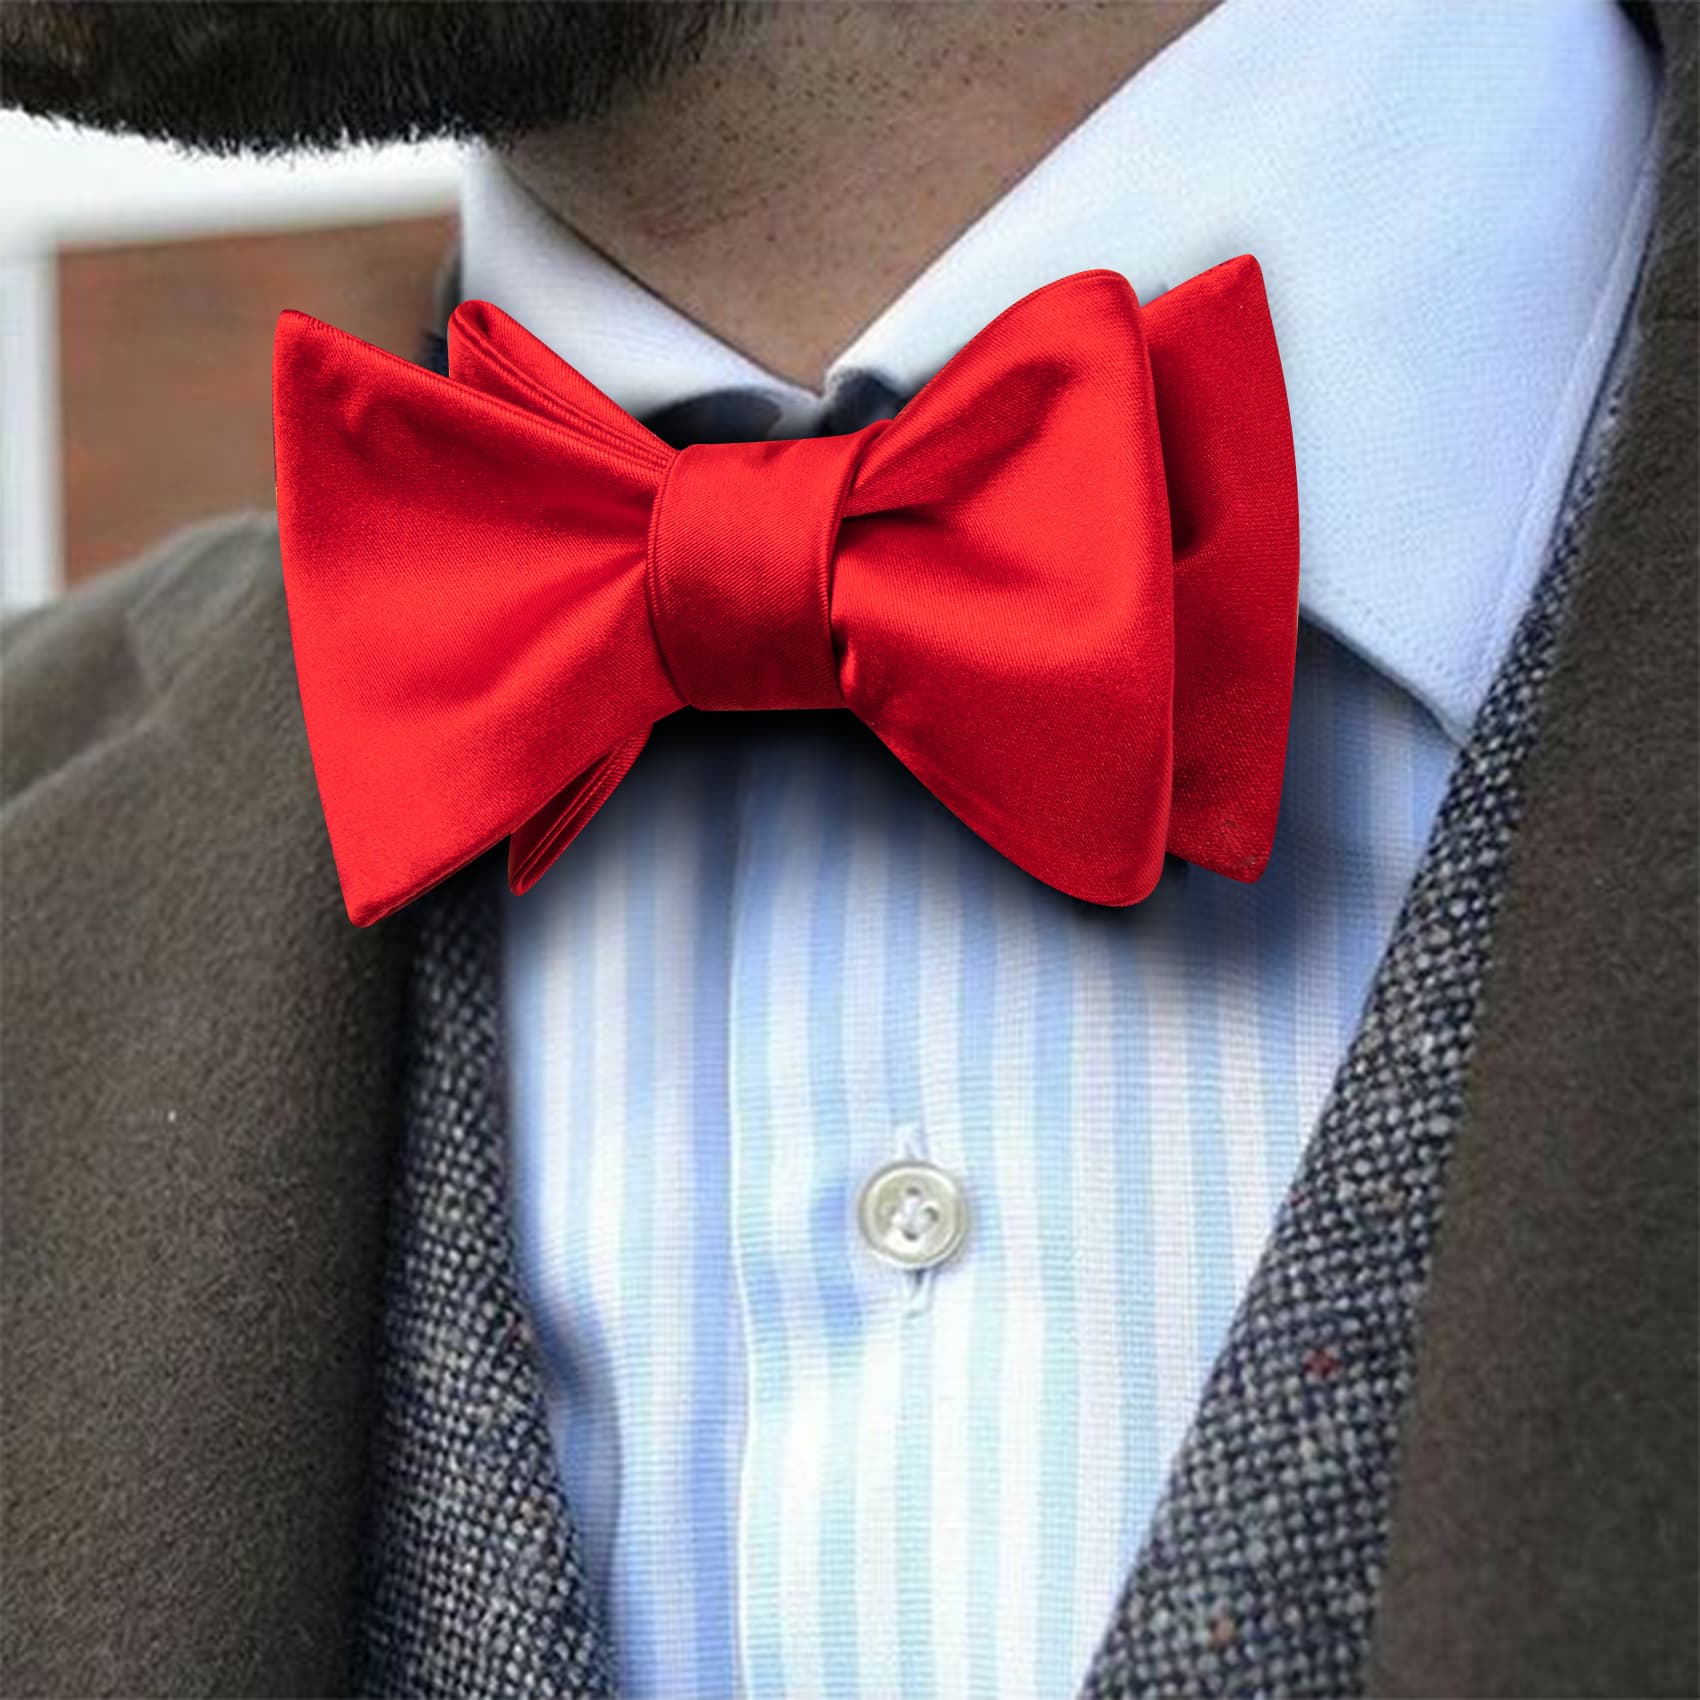 Brown suit jacket with red bow tie 